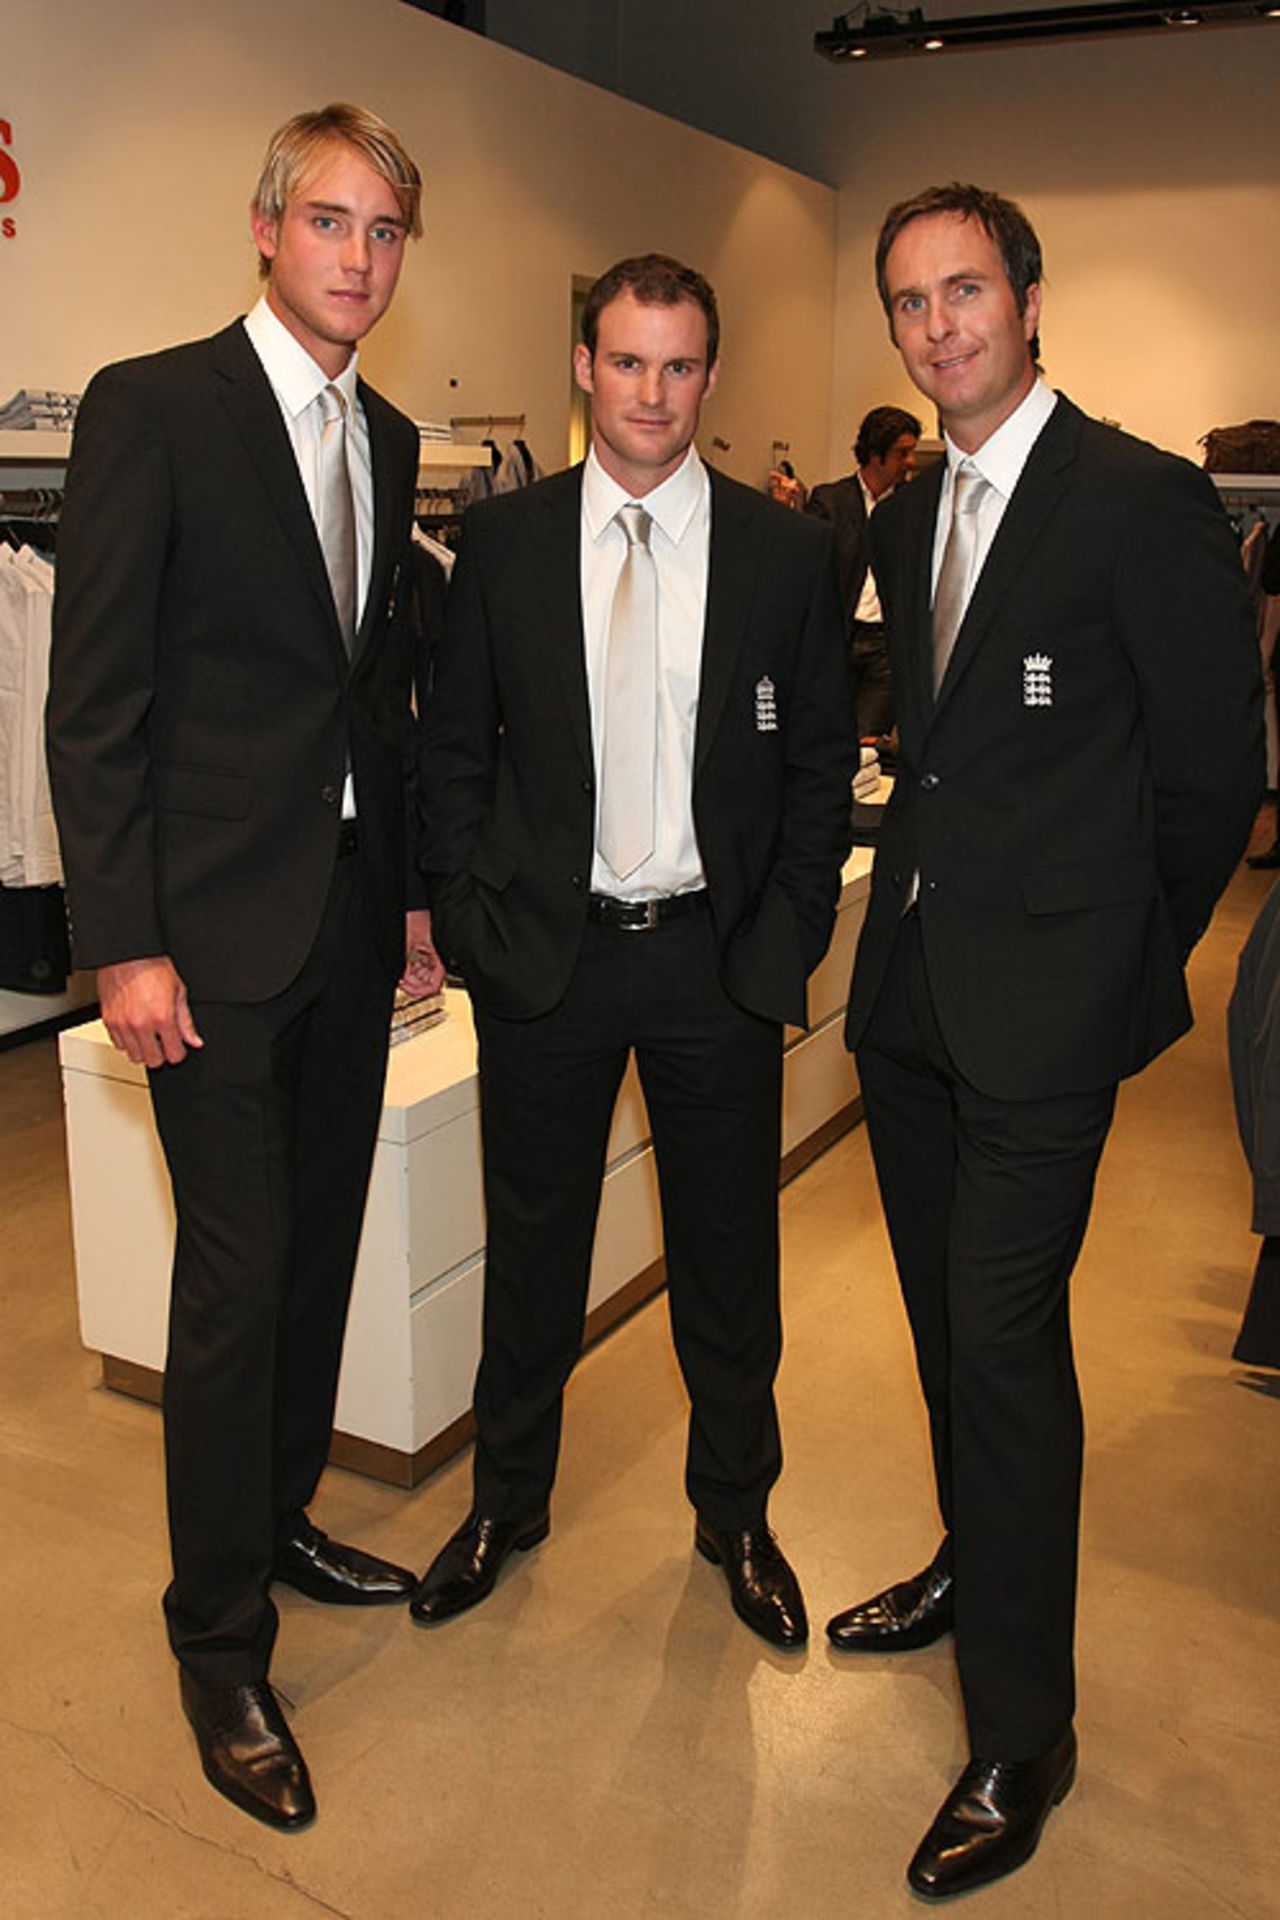 Stuart Broad, Andrew Strauss and Michael Vaughan attend a Hugo Boss pre-Ashes party in London, May 28, 2009